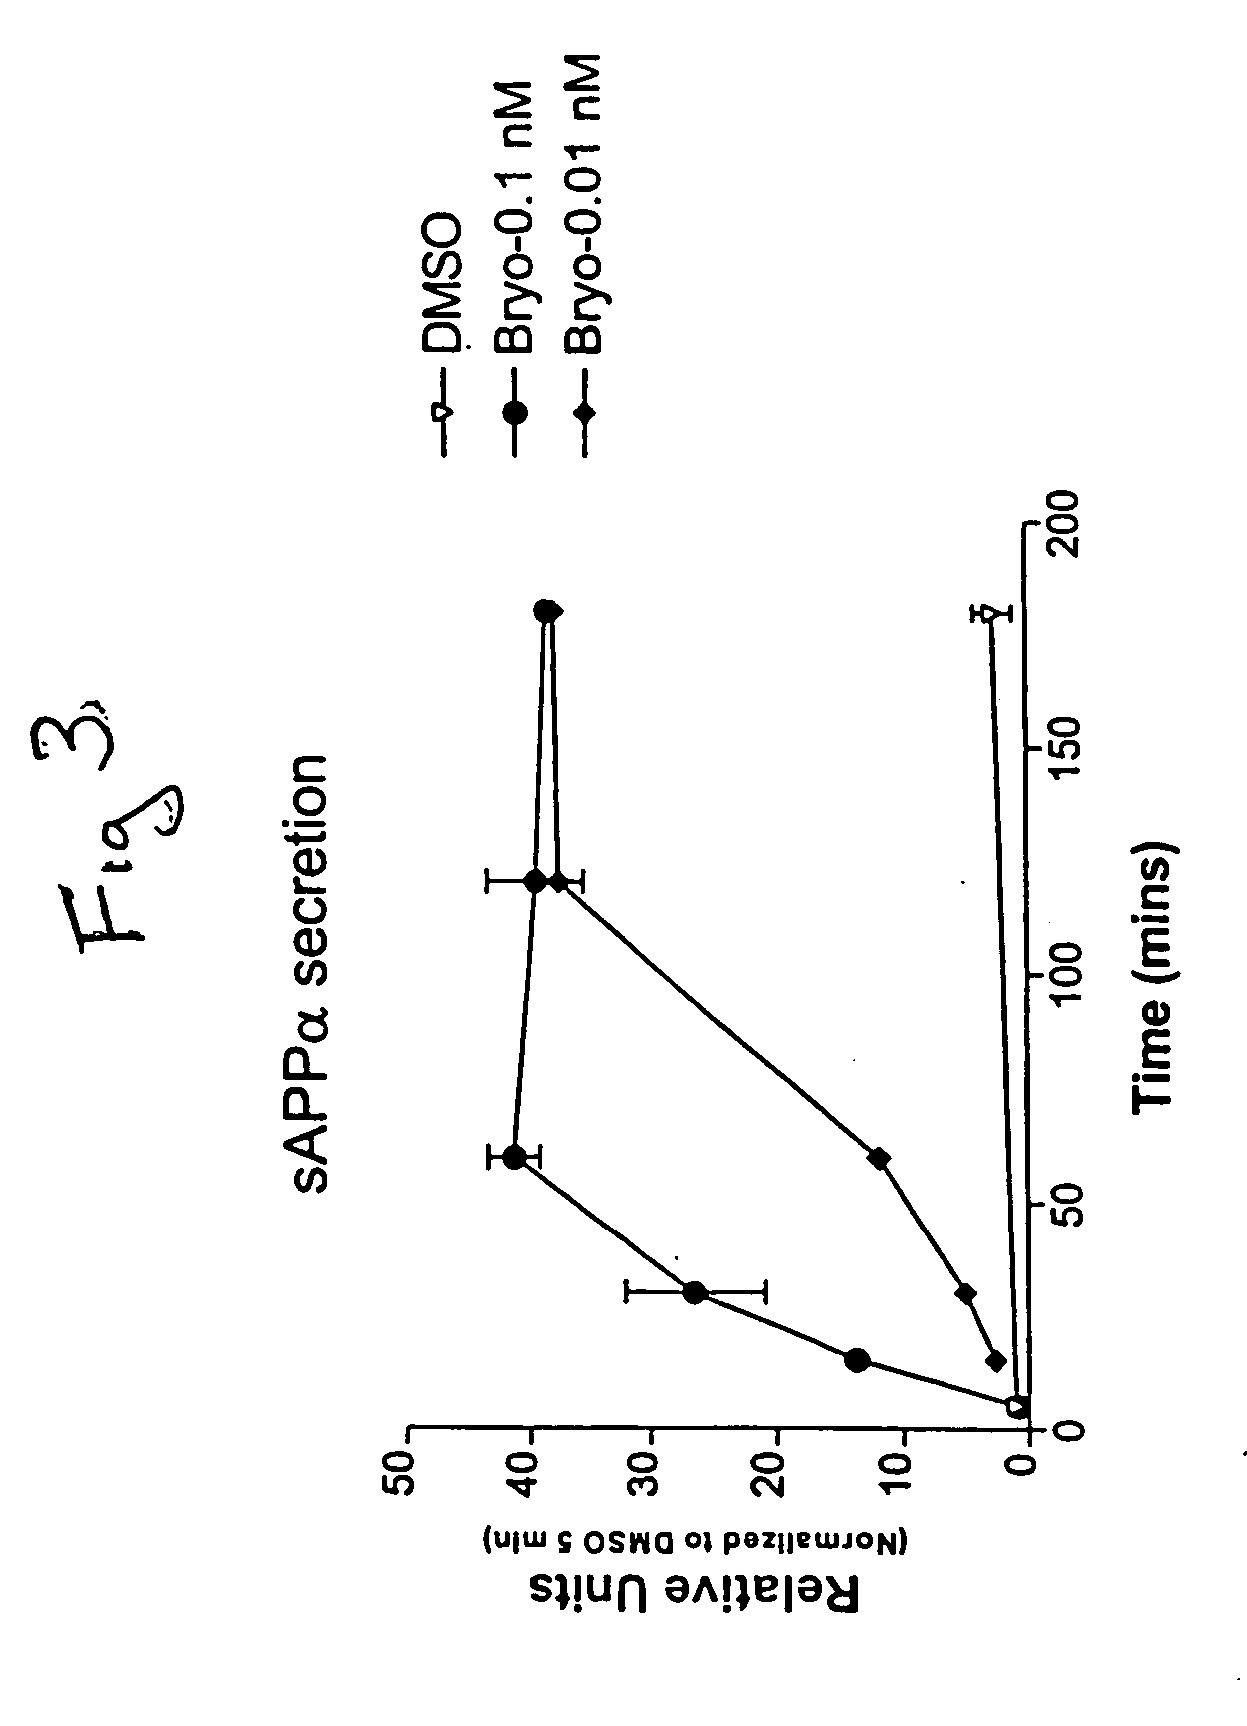 Methods for Alzheimer's Disease treatment and cognitive enhancement